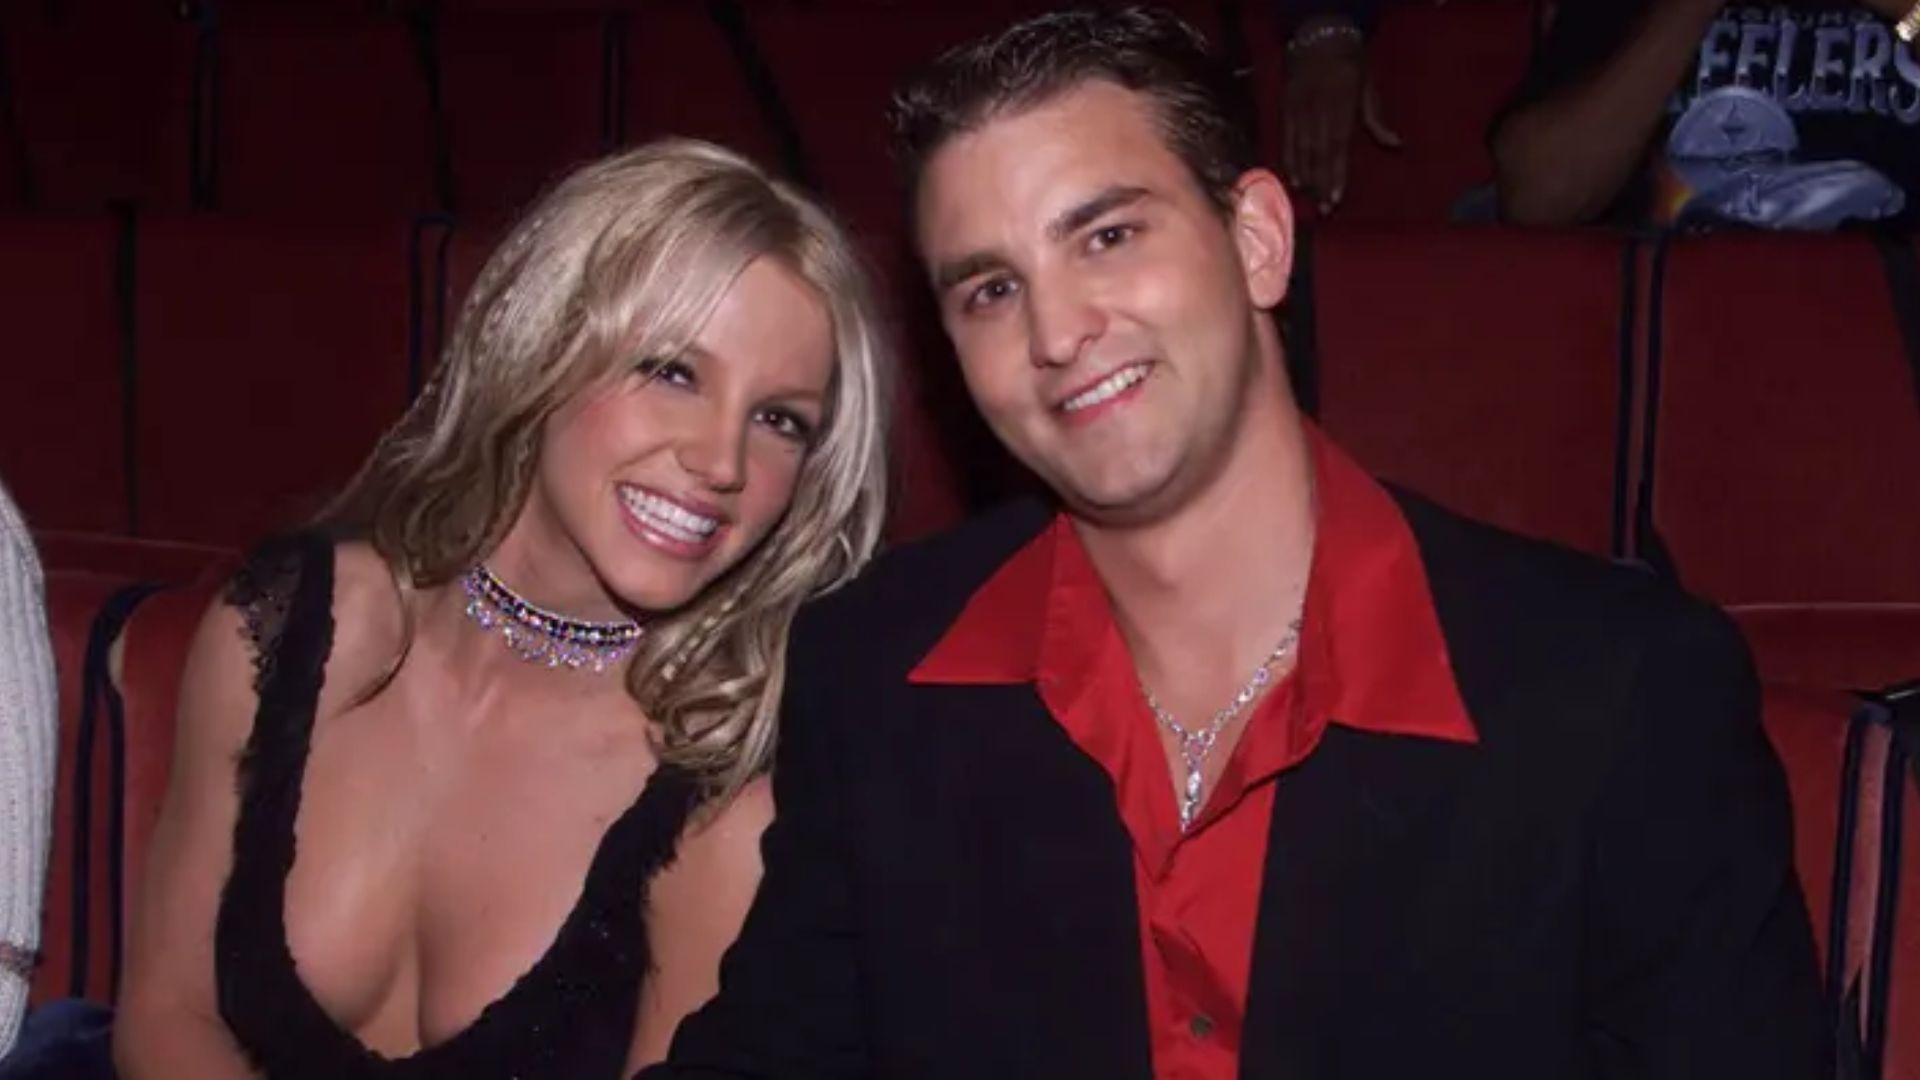 Britney Spears says her sibling was not welcome at her wedding